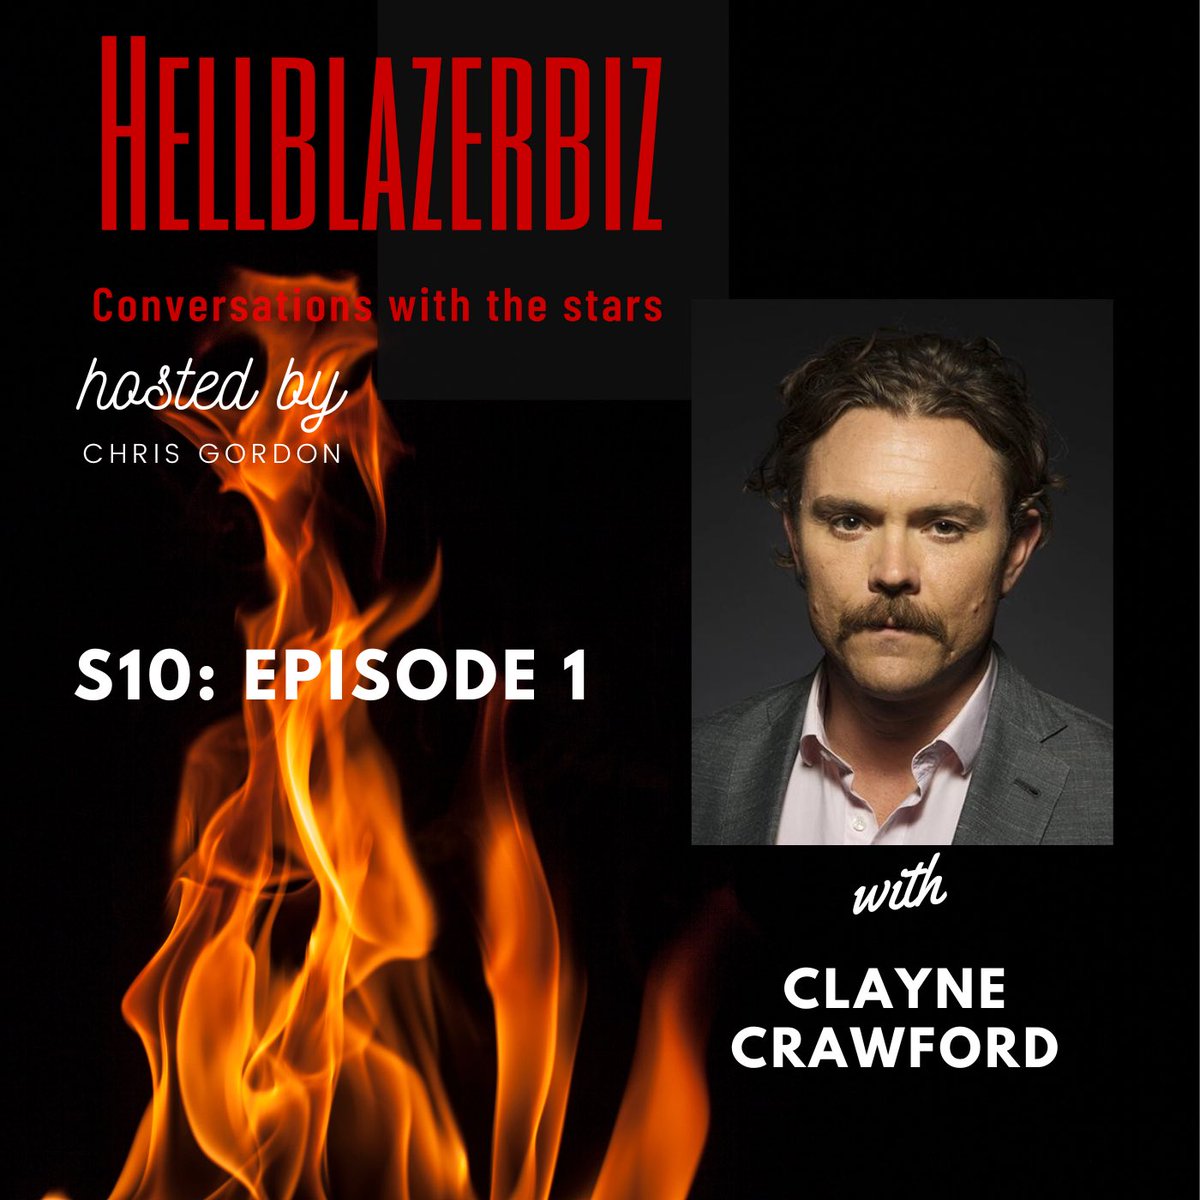 Delighted to share my #interview with the ever awesome @ClayneCrawford talking about his films & the BloodySeahorse Film Experience  #actor #claynecrawford #hellblazerbiz #interview #youtube #viral #entertainment #tv #film #indiefilm 

youtu.be/RfBQoA4HVxc